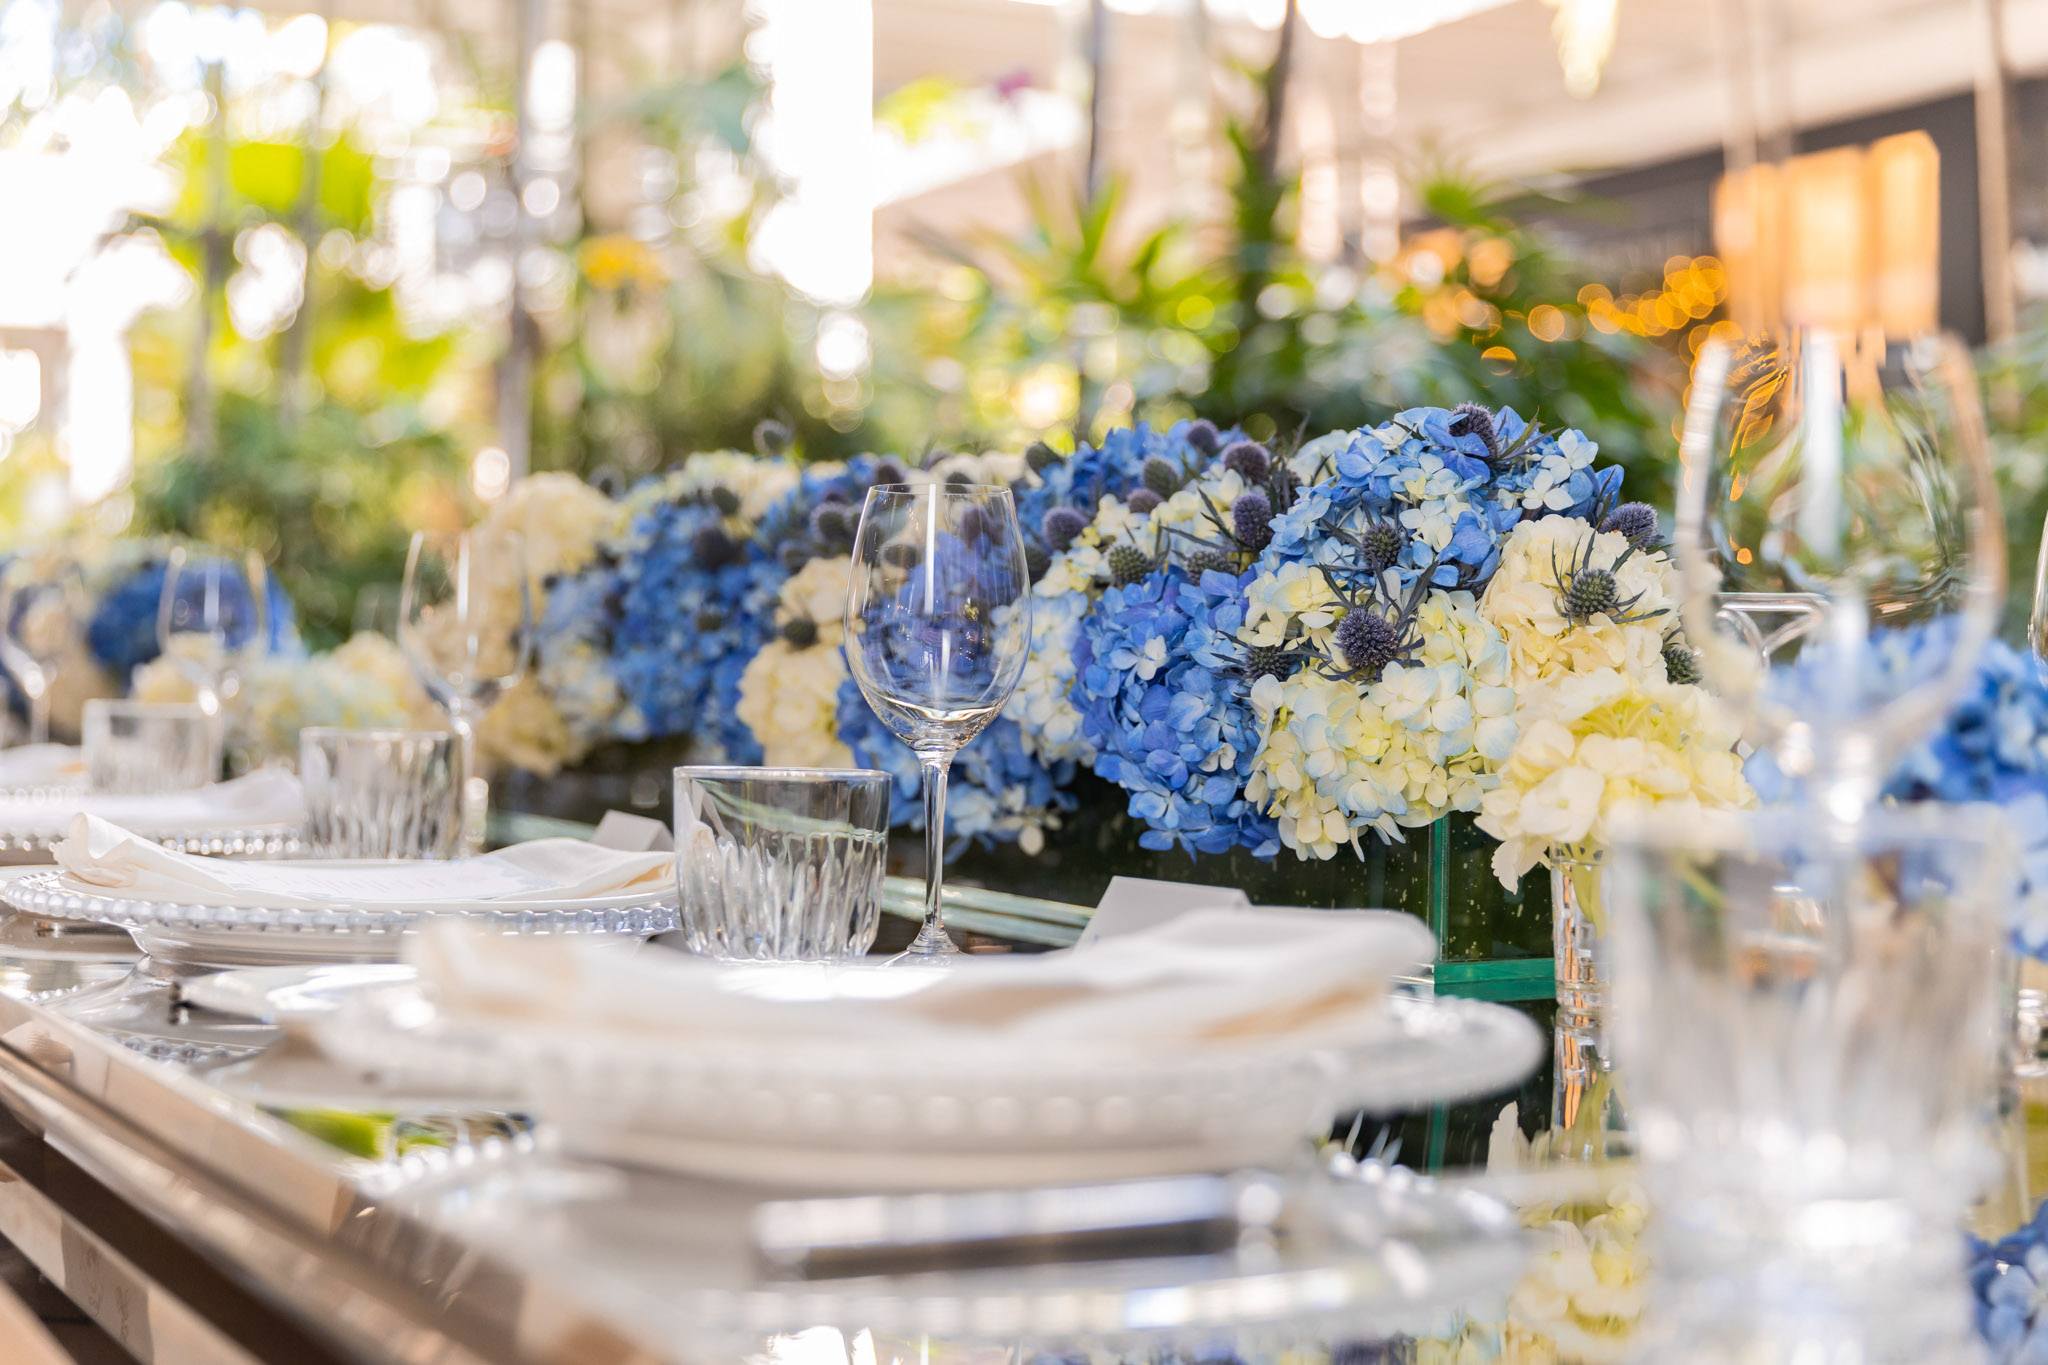 A variety of images showcasing Bal Harbour Shops’ Thanksharing Celebration event. Images include guests in attendance, table décor, and food featured at the event.